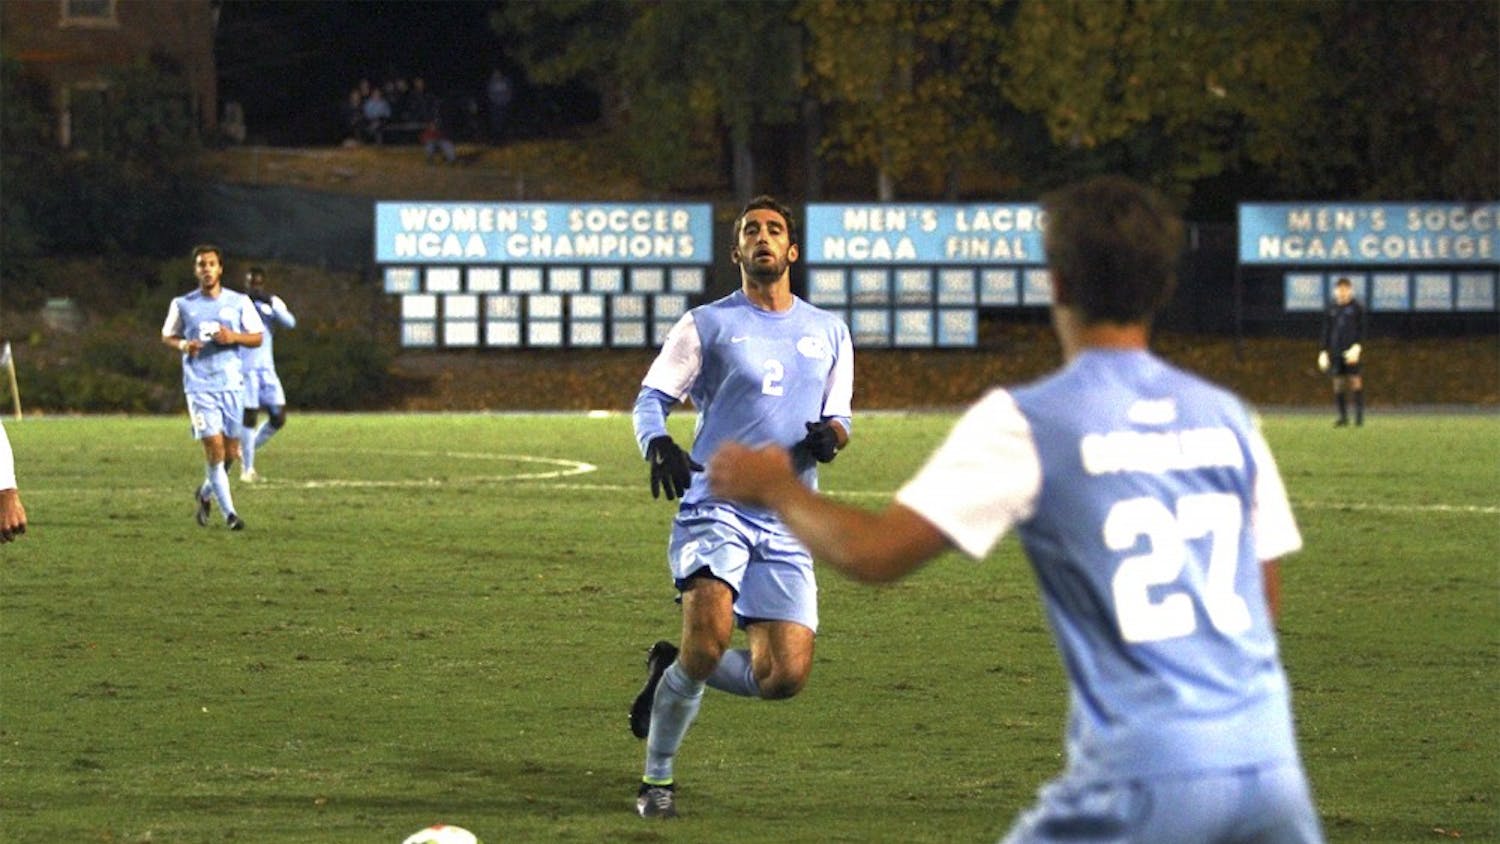 Jonathan Campbell (2) recorded an assist for UNC's second-half goal, but later caused a deflection that led to an equalizing goal by Virginia.